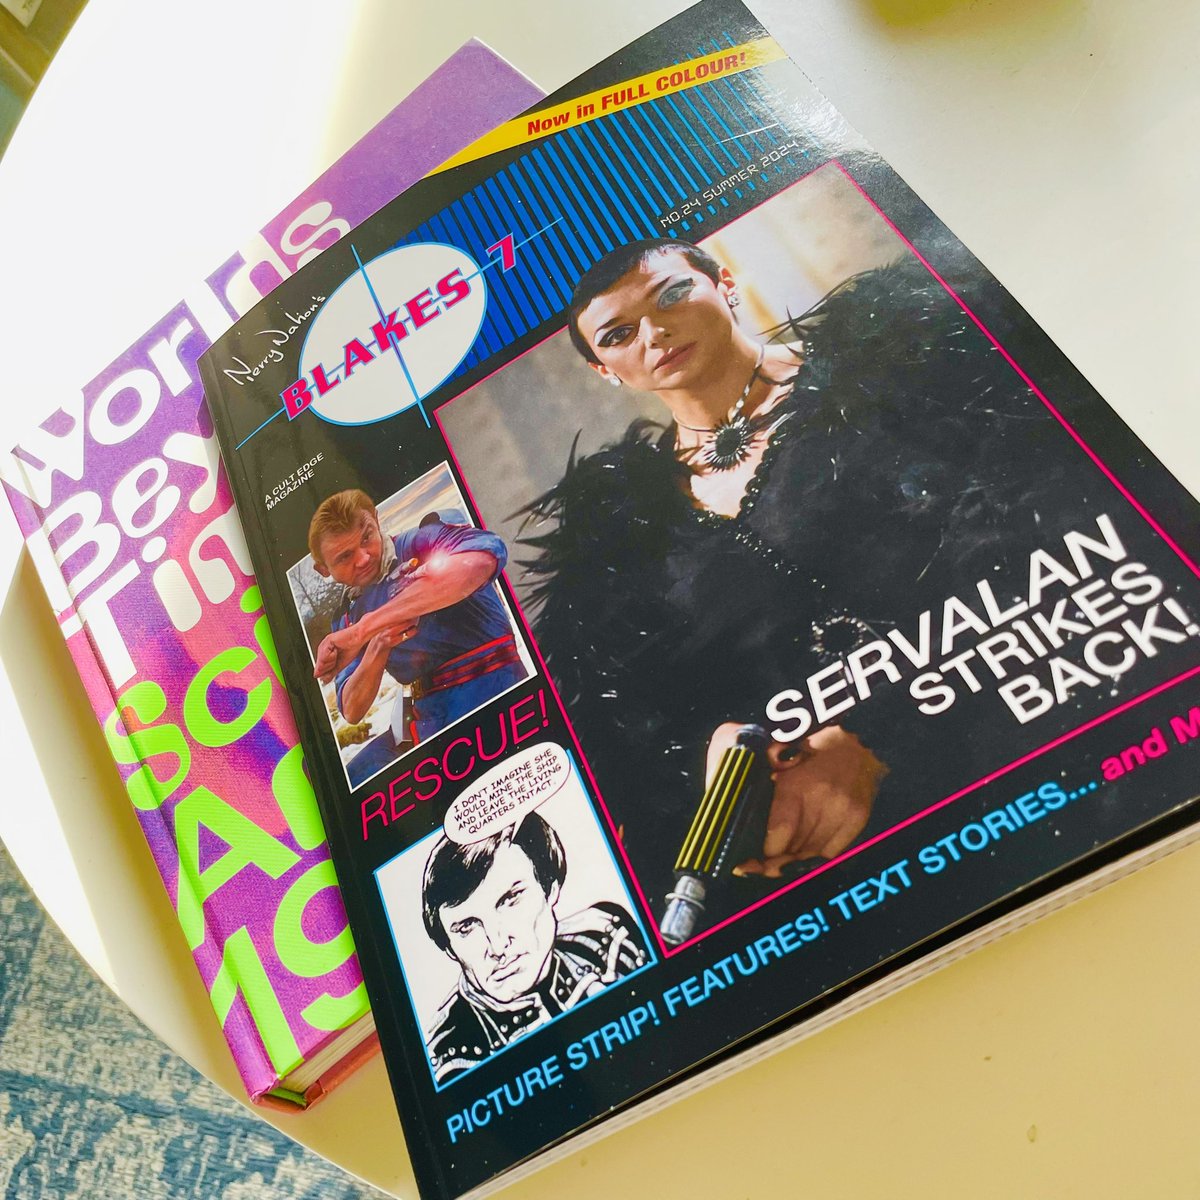 My copy of the new issue of #Blakes7 Magazine has (finally) arrived. Yes, even we have to pay for our copies 😊 Pick up yours from bit.ly/b7magazine24 and use SUNSHINE15 at checkout for a 15% discount (expires tomorrow at midnight!)